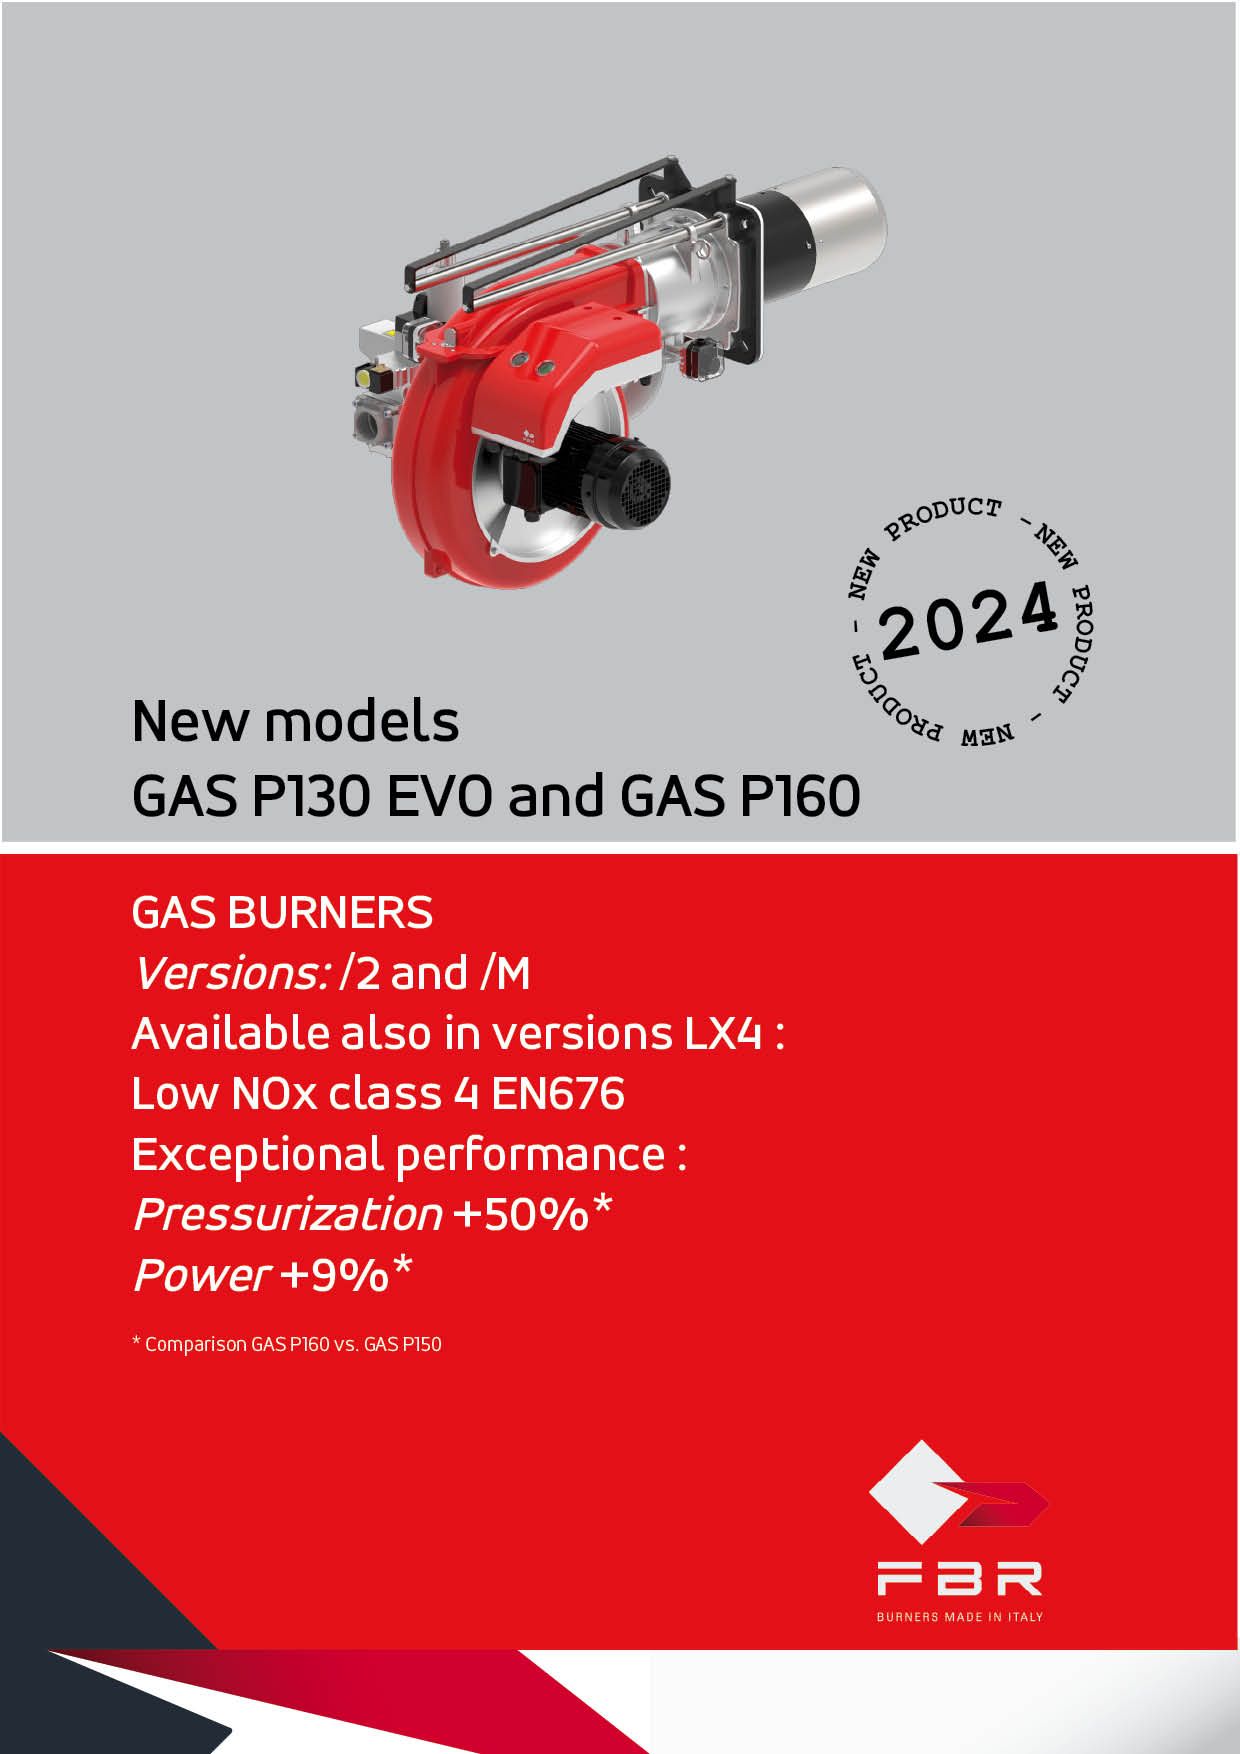 NEW MODELS GAS P130 EVO and GAS P160